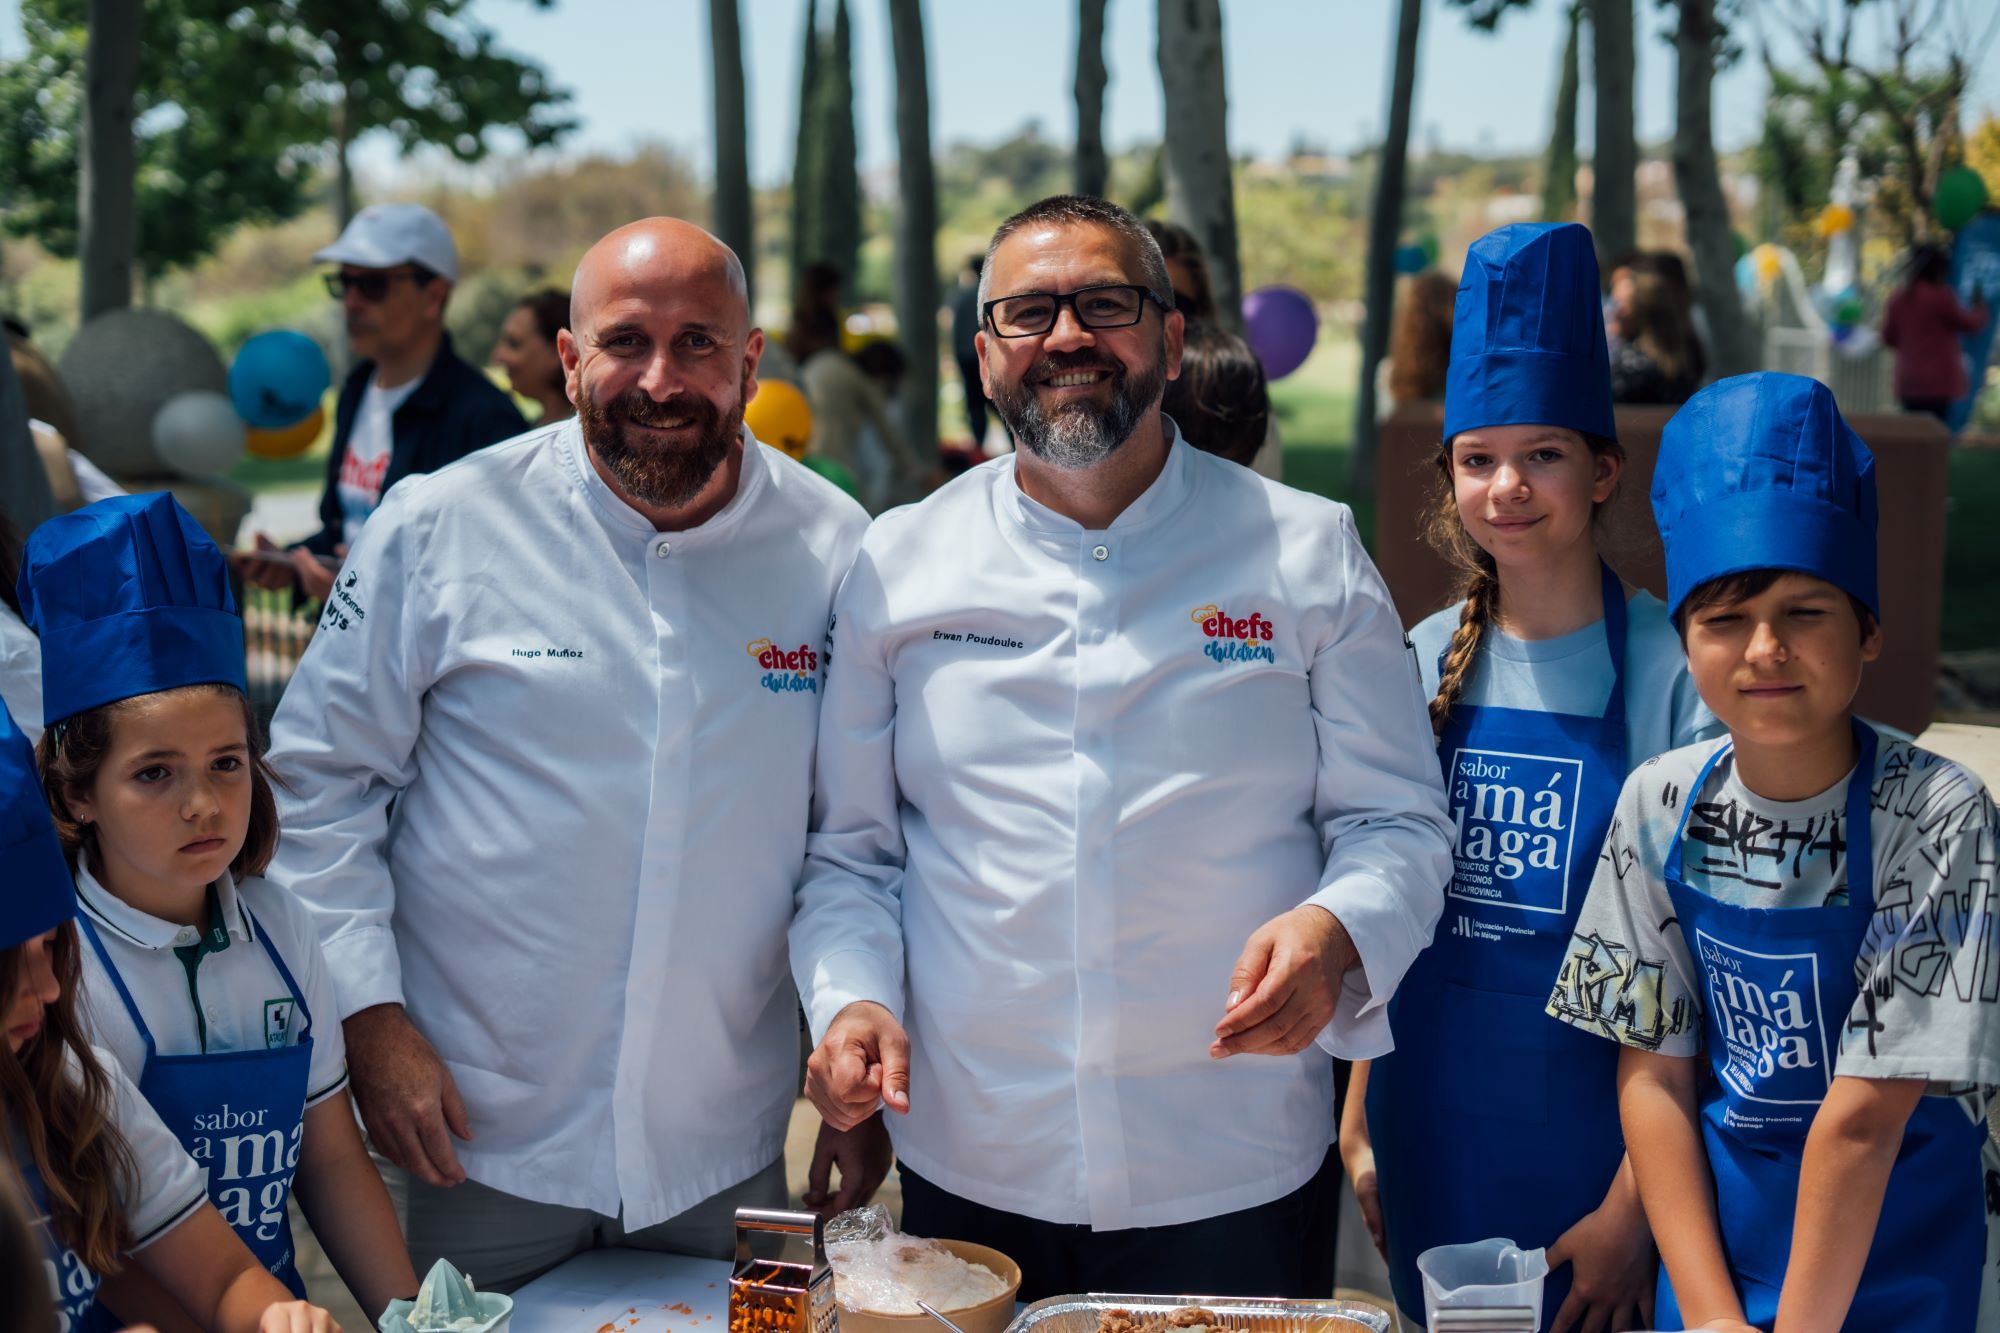 Le Cordon Bleu Madrid participated in the 6th edition of ChefsForChildren on the benefit of children with autism